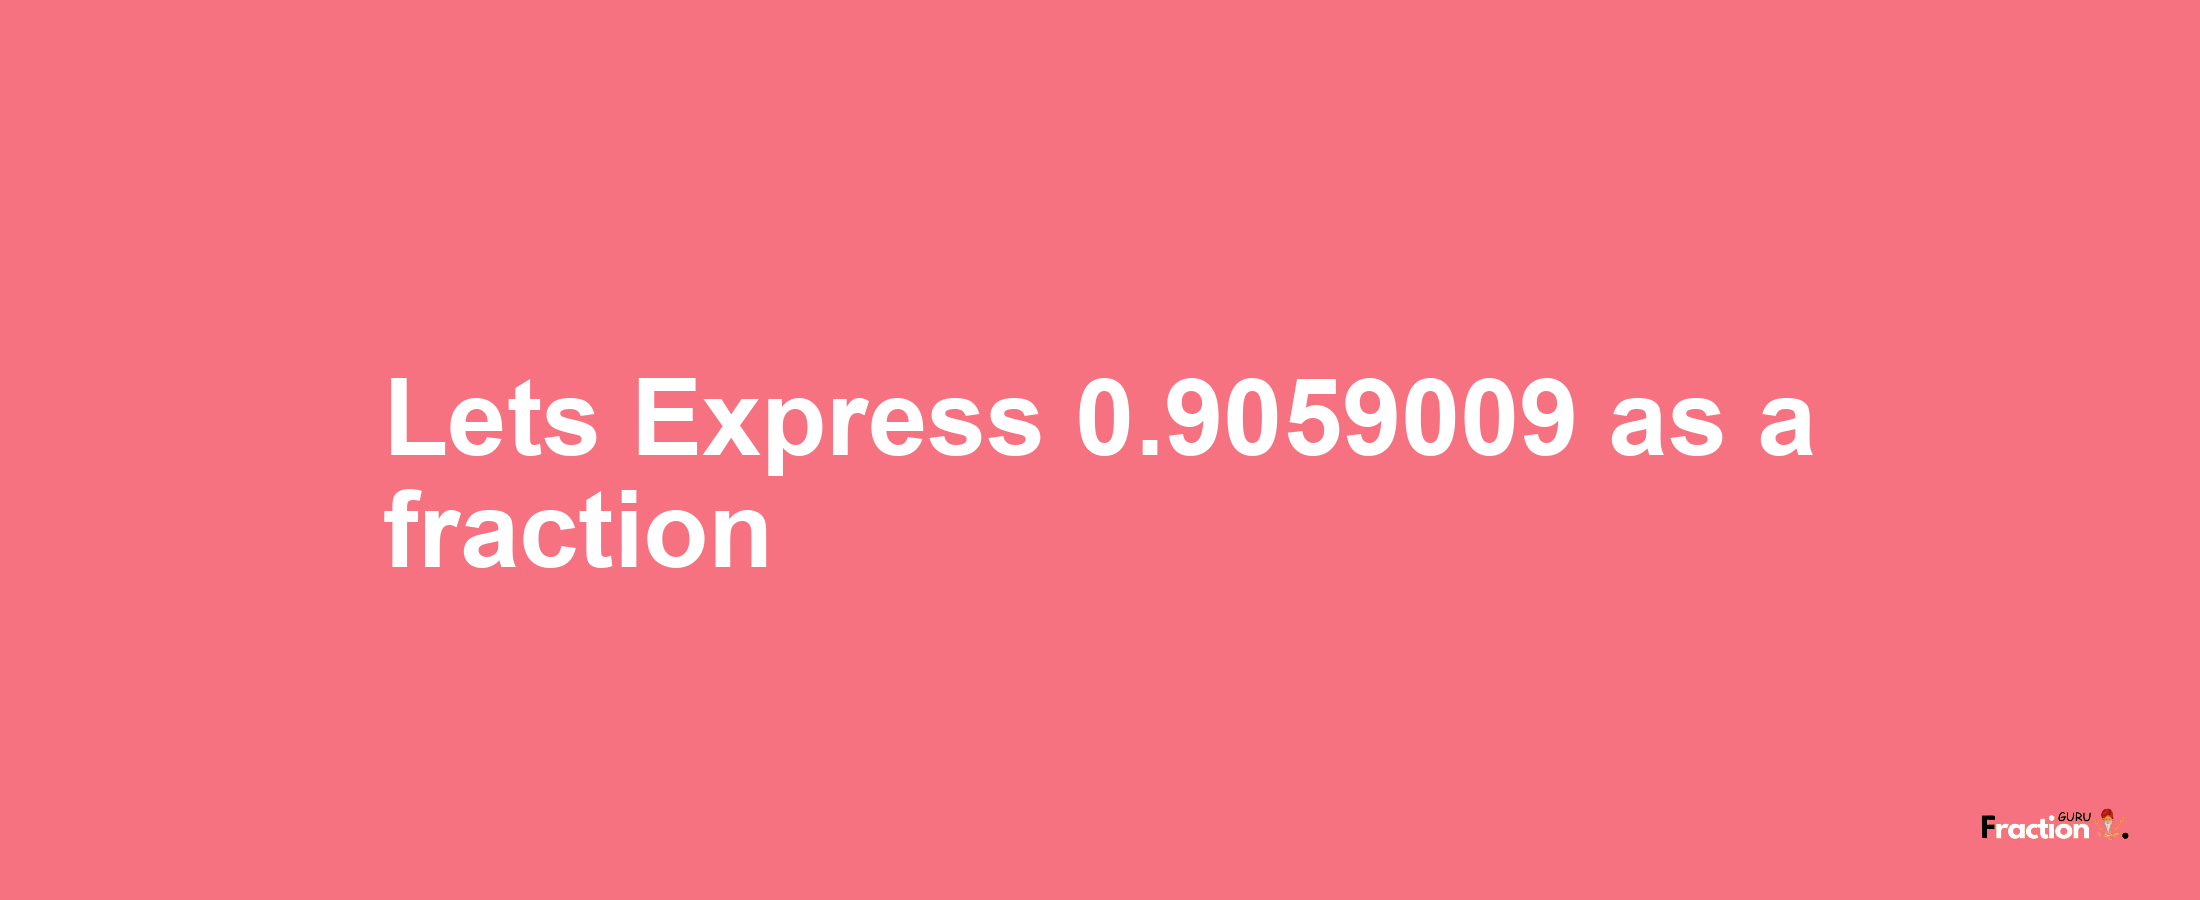 Lets Express 0.9059009 as afraction